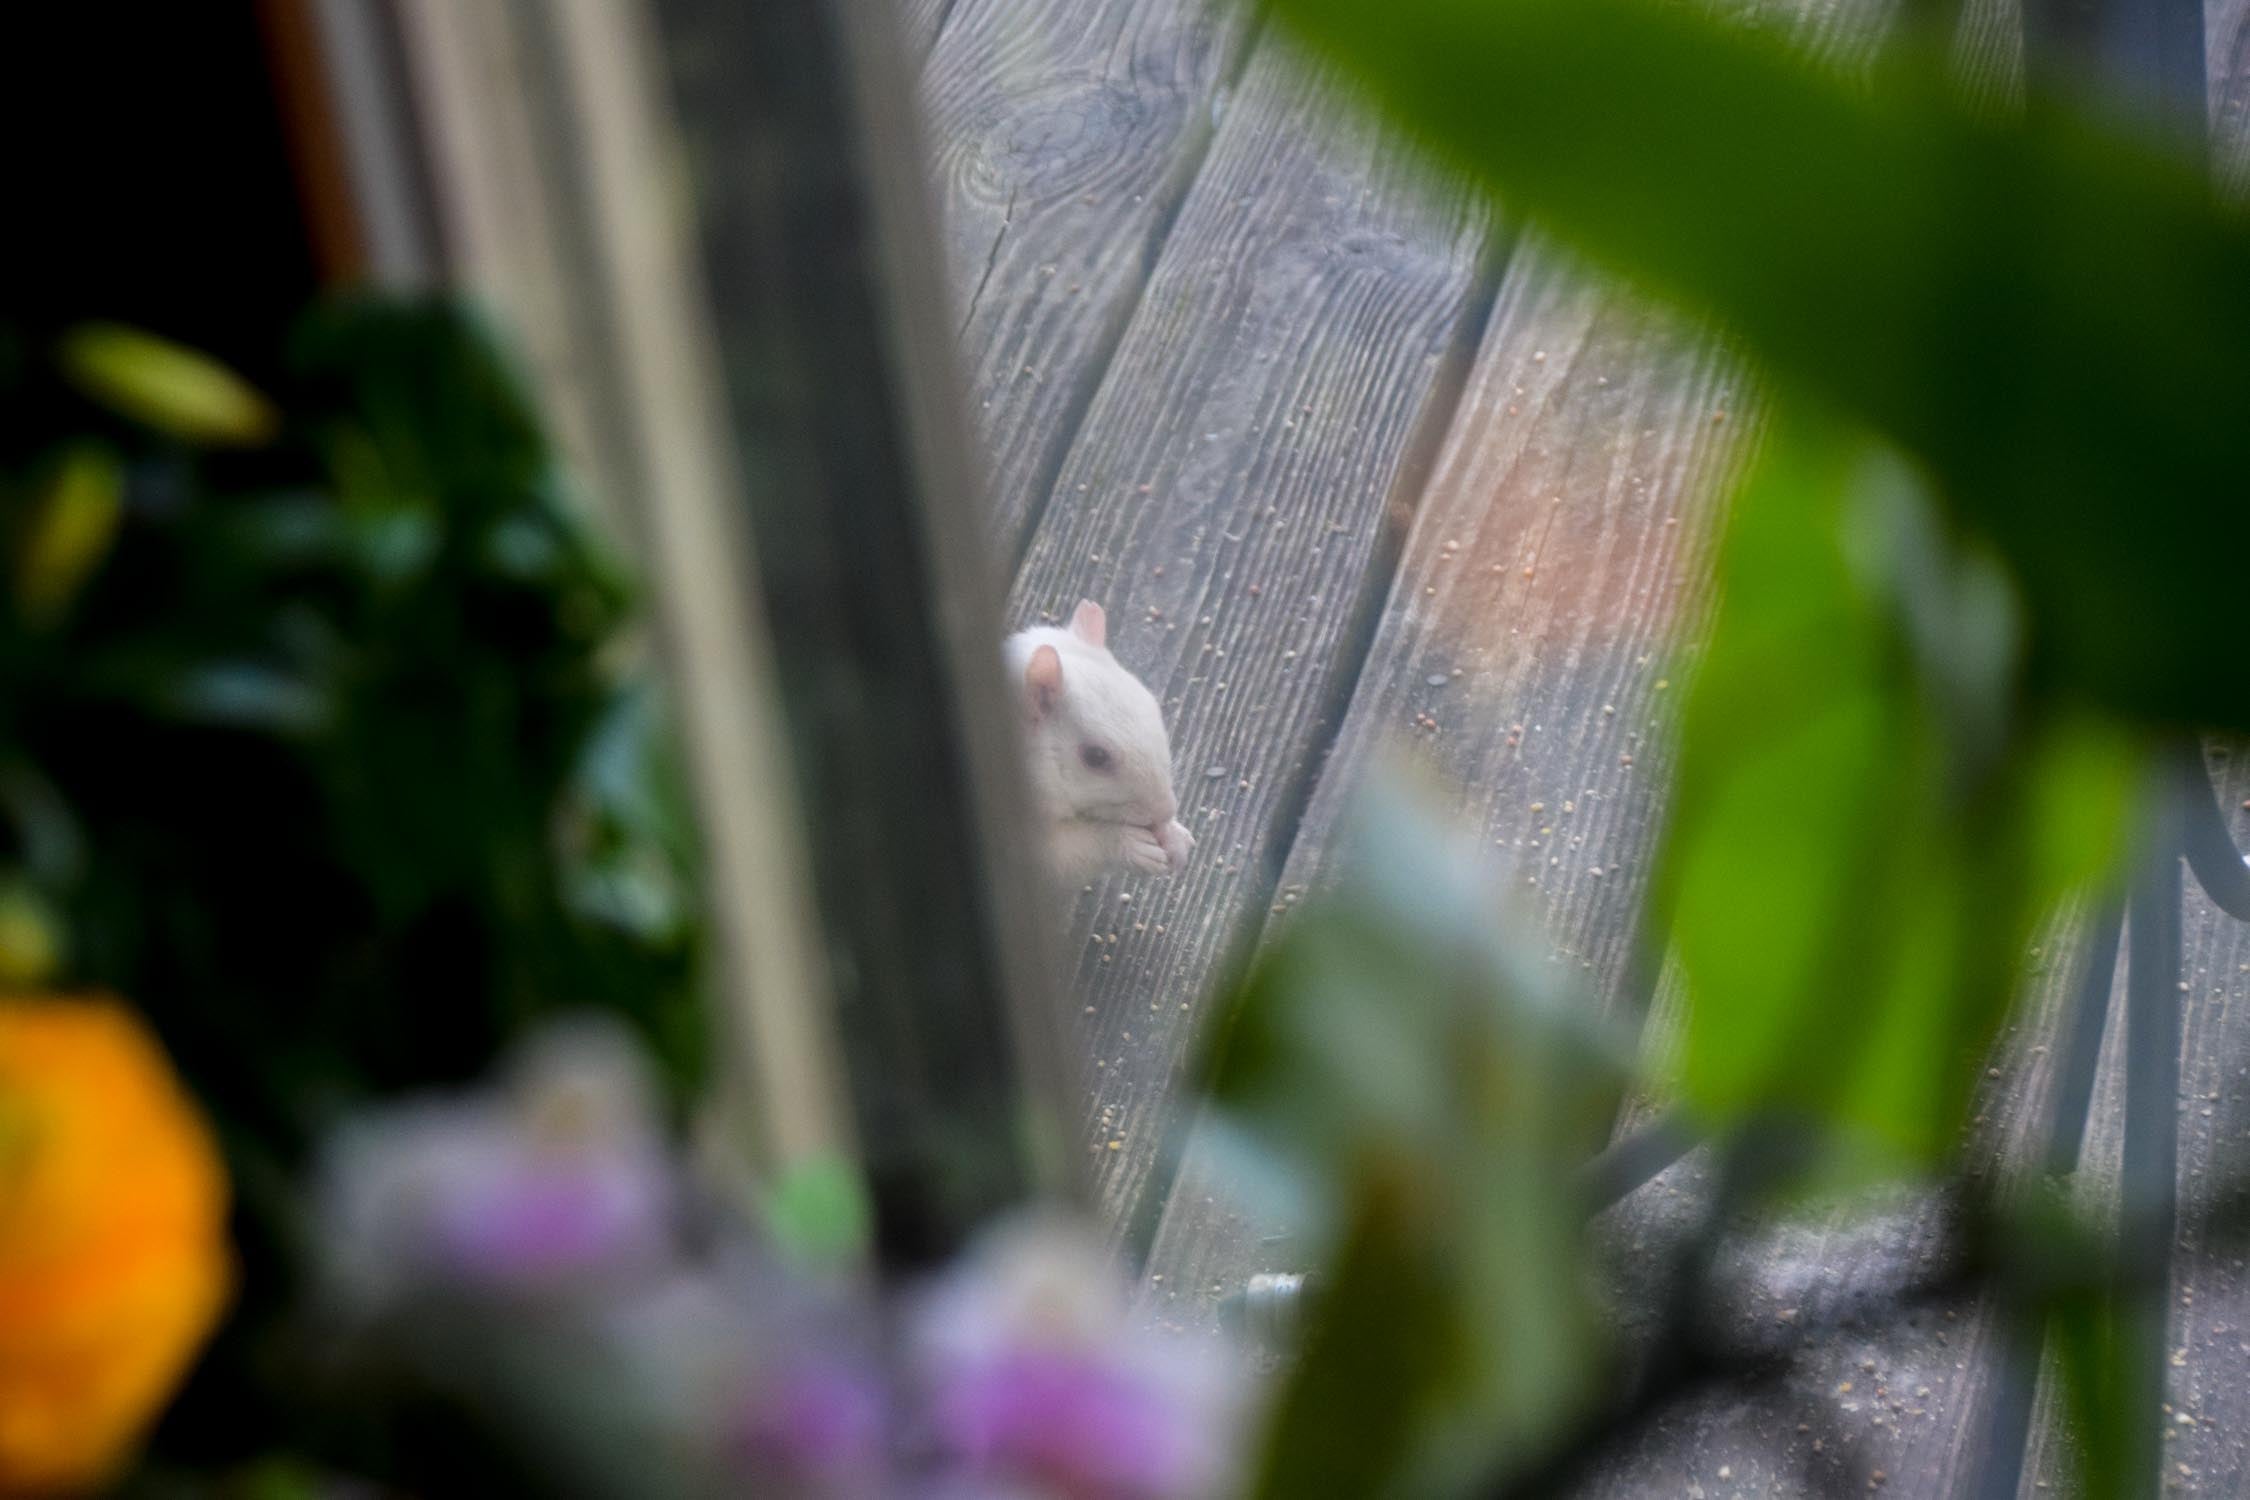 A pale squirrel having a snack visible through a vignette of flowers.